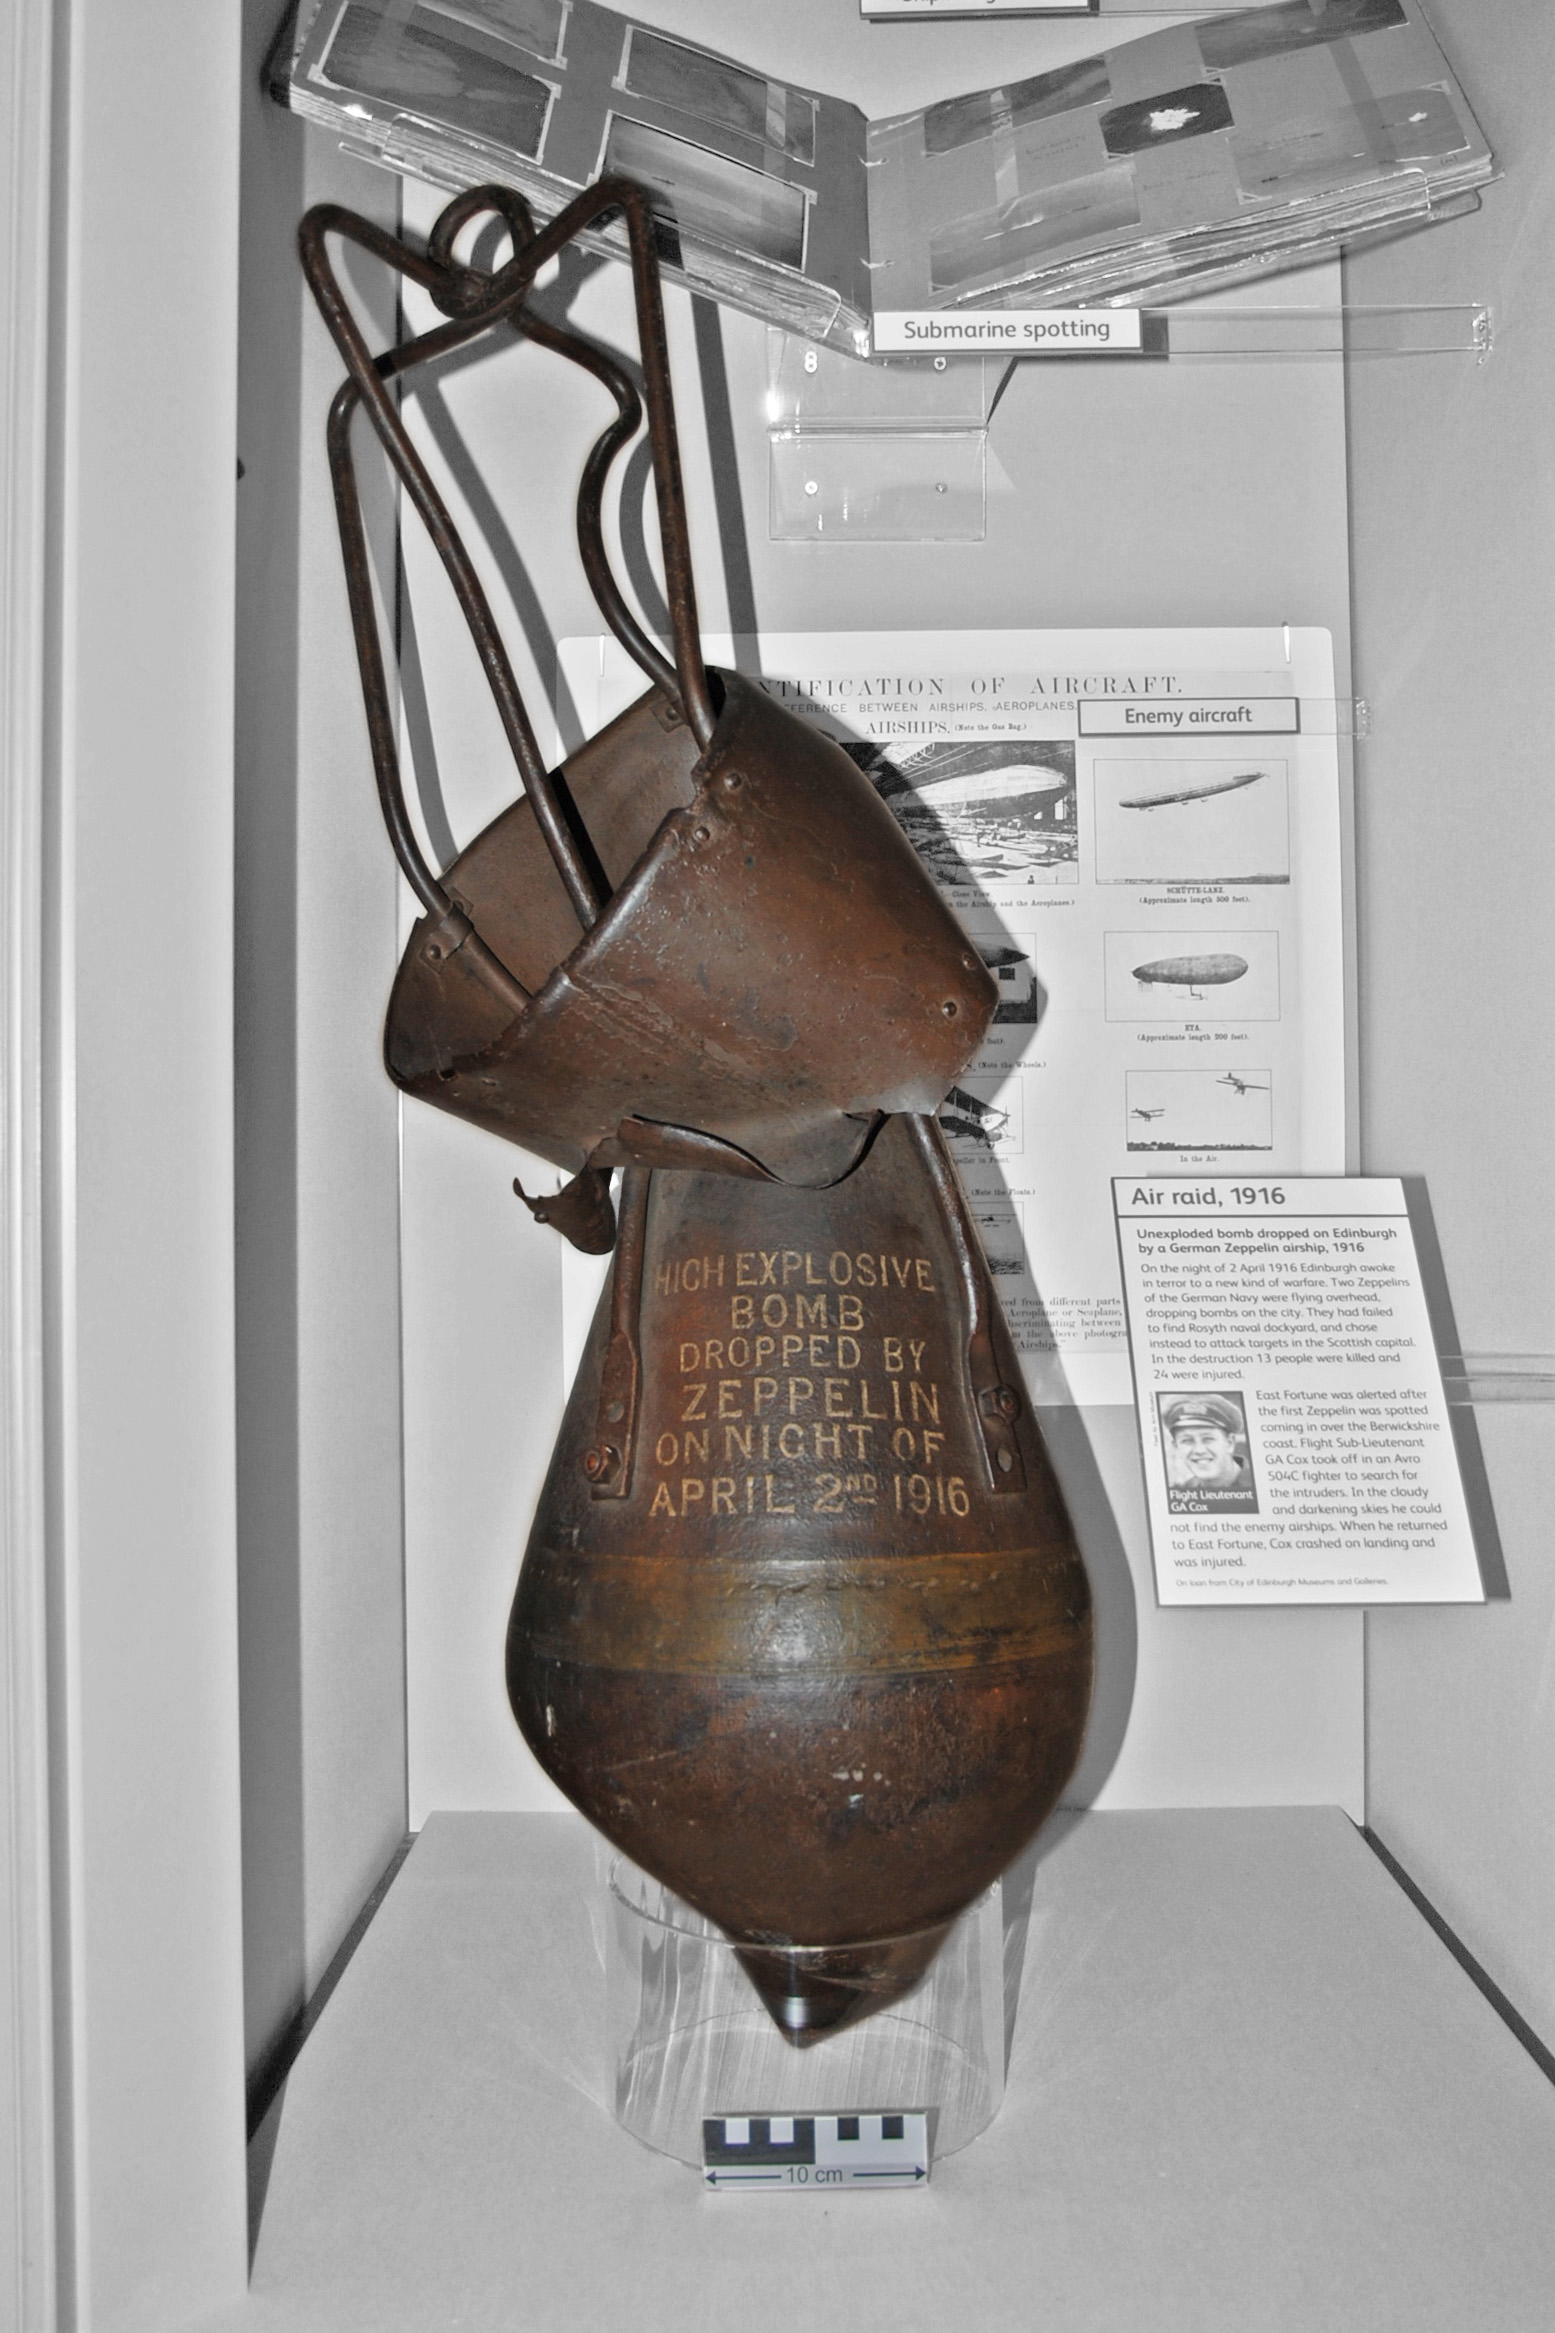 An unexploded bomb dropped during the air raid